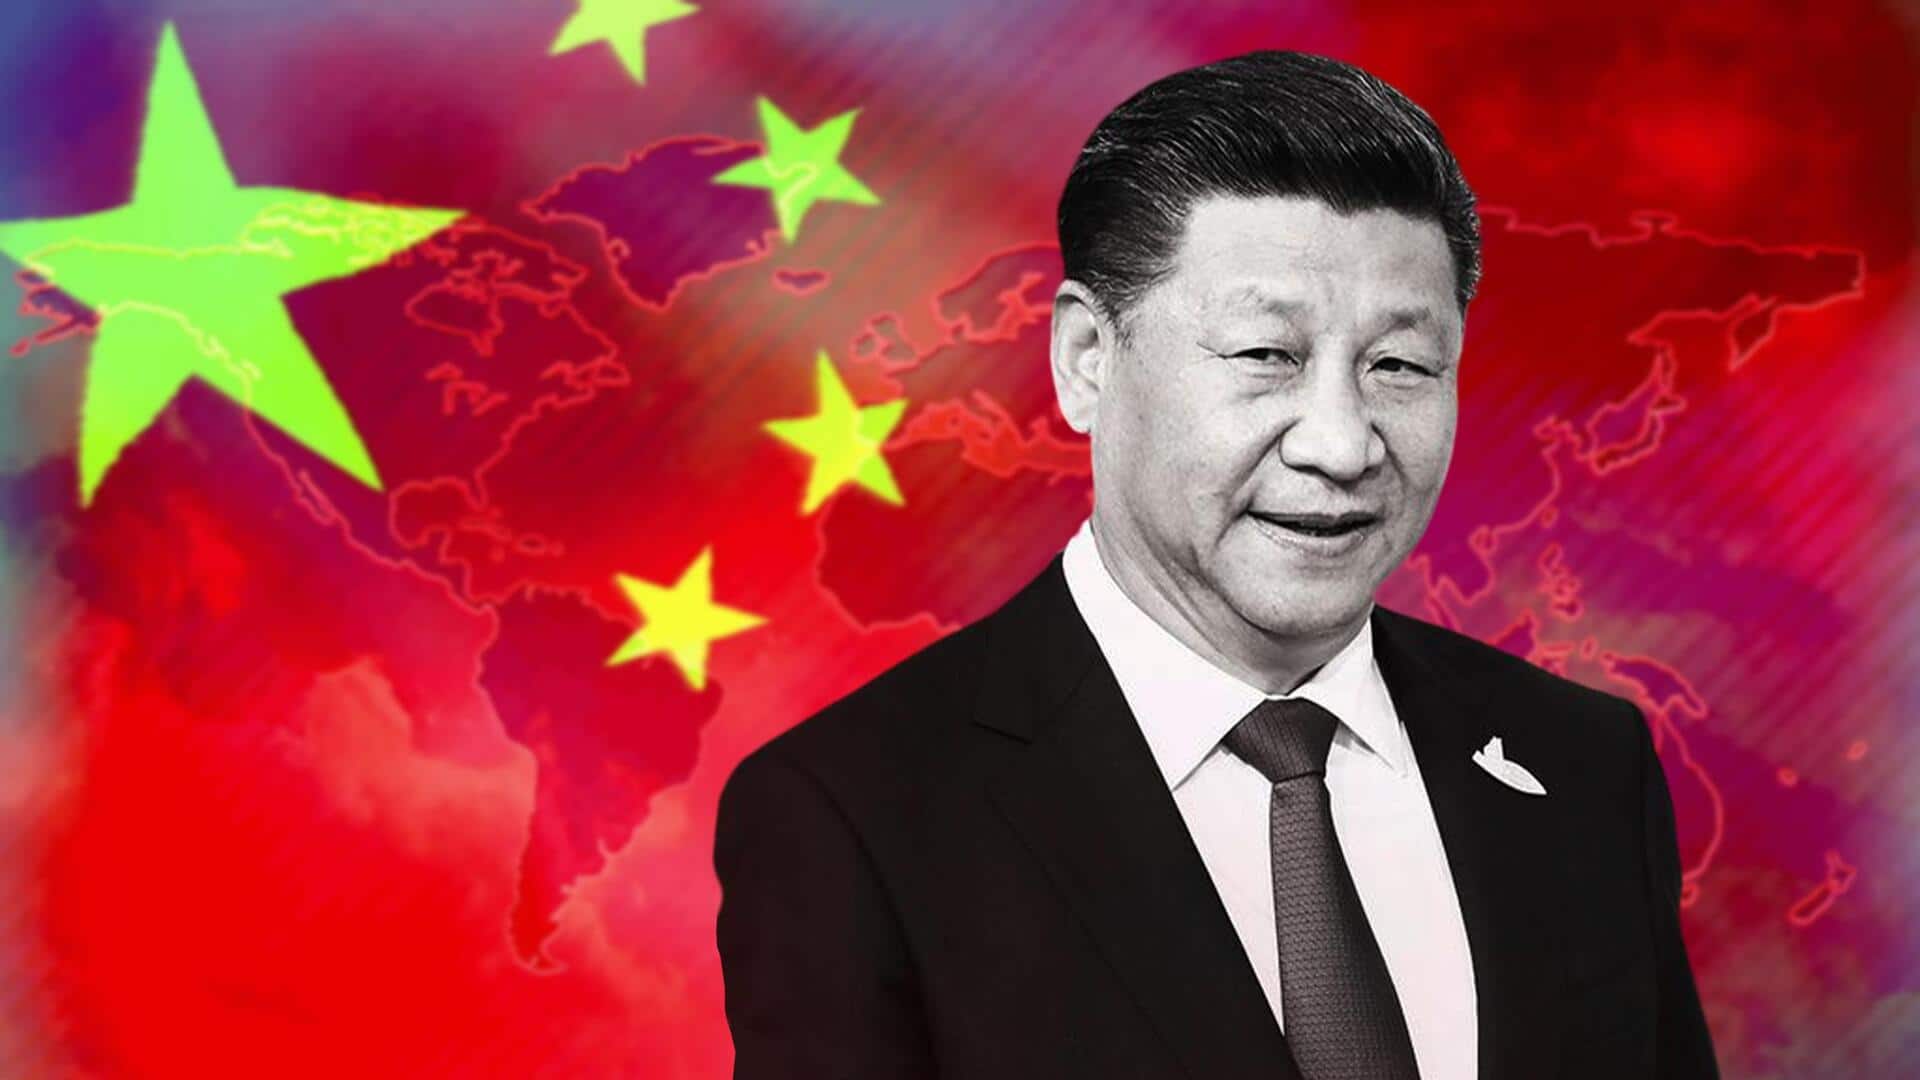 Explained: China's biggest annual political event, Two Sessions, begins